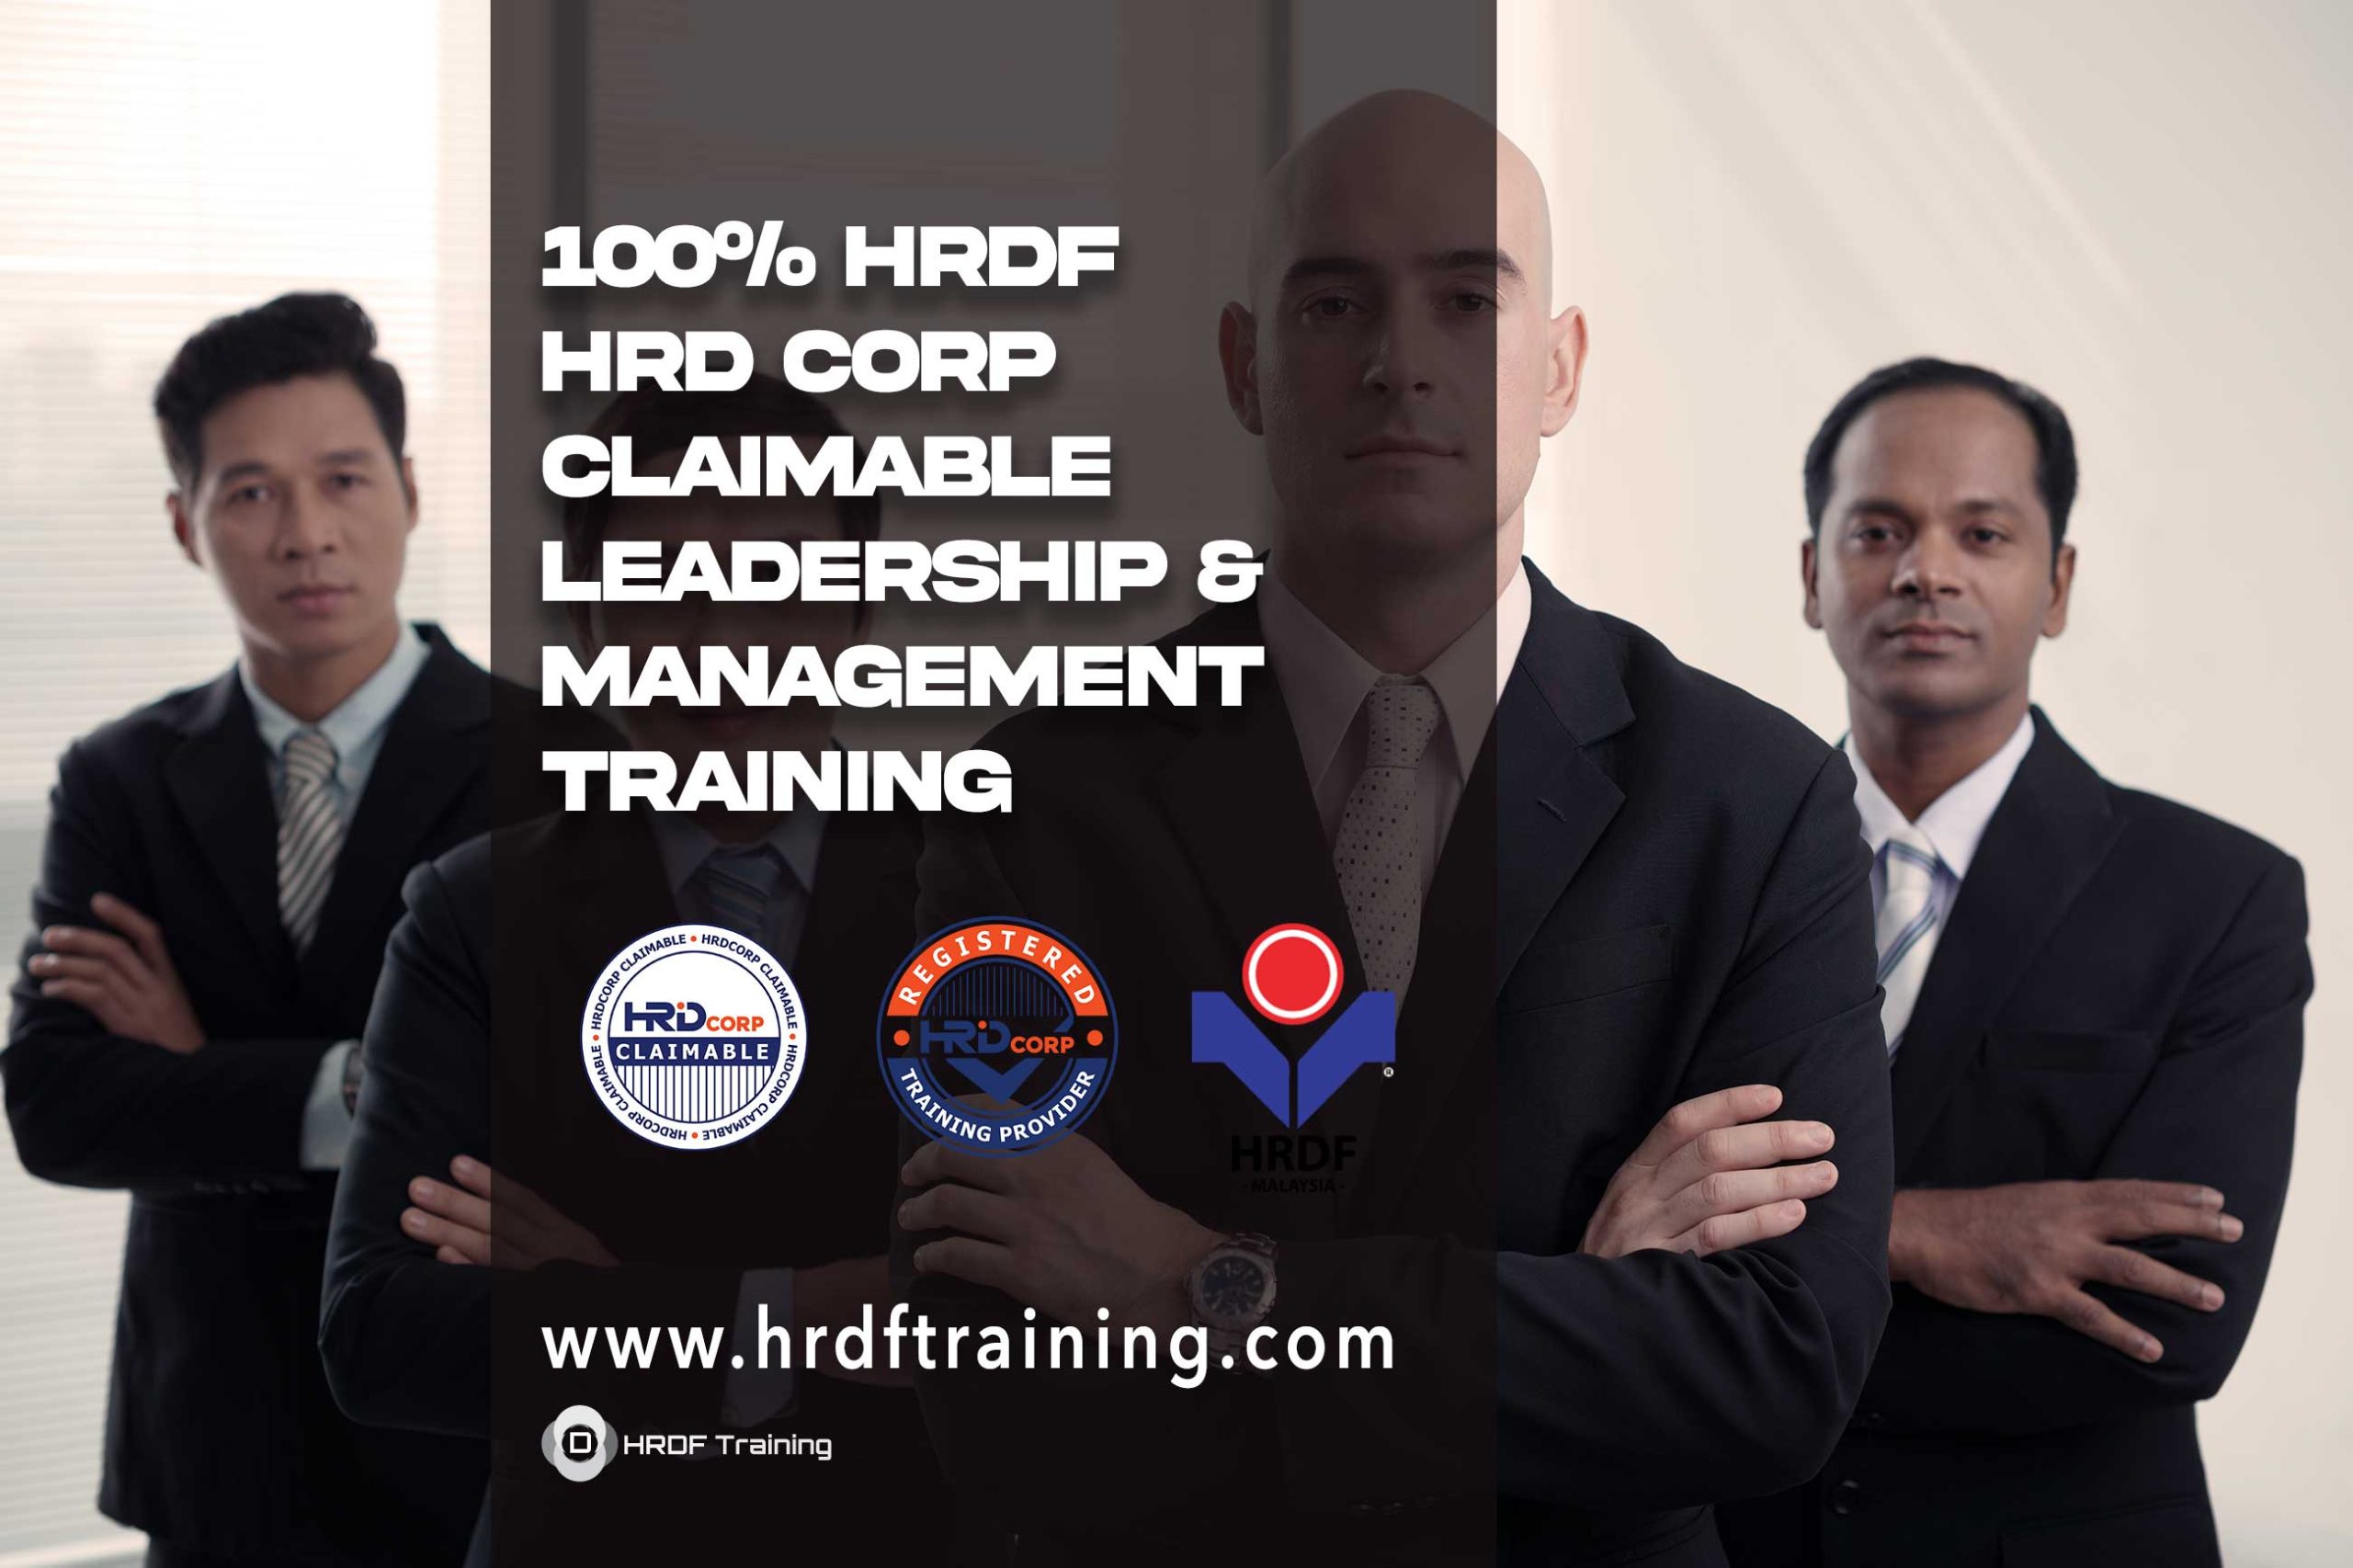 HRDF-HRD-Corp-Claimable-Leadership-&-Management-Training